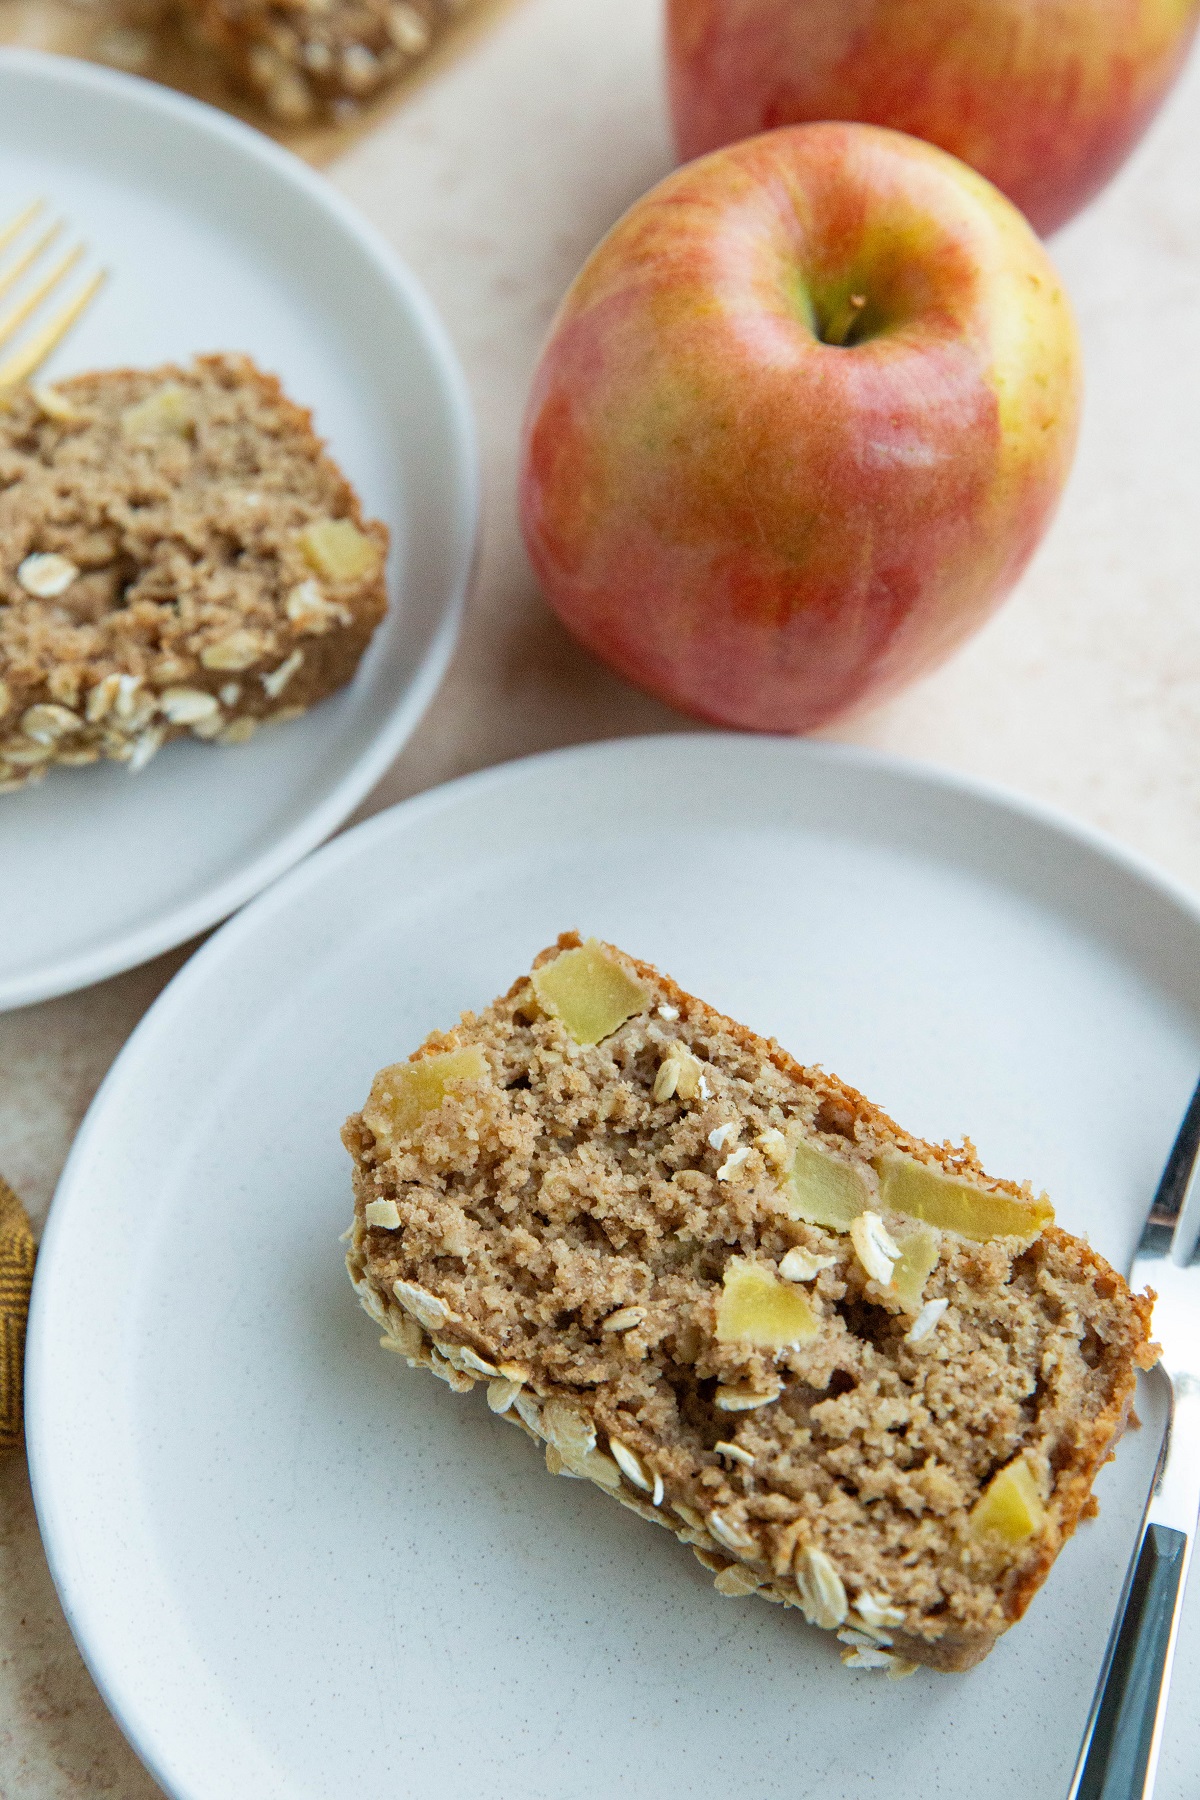 Slices of apple bread on white plates with fresh apples in the background.